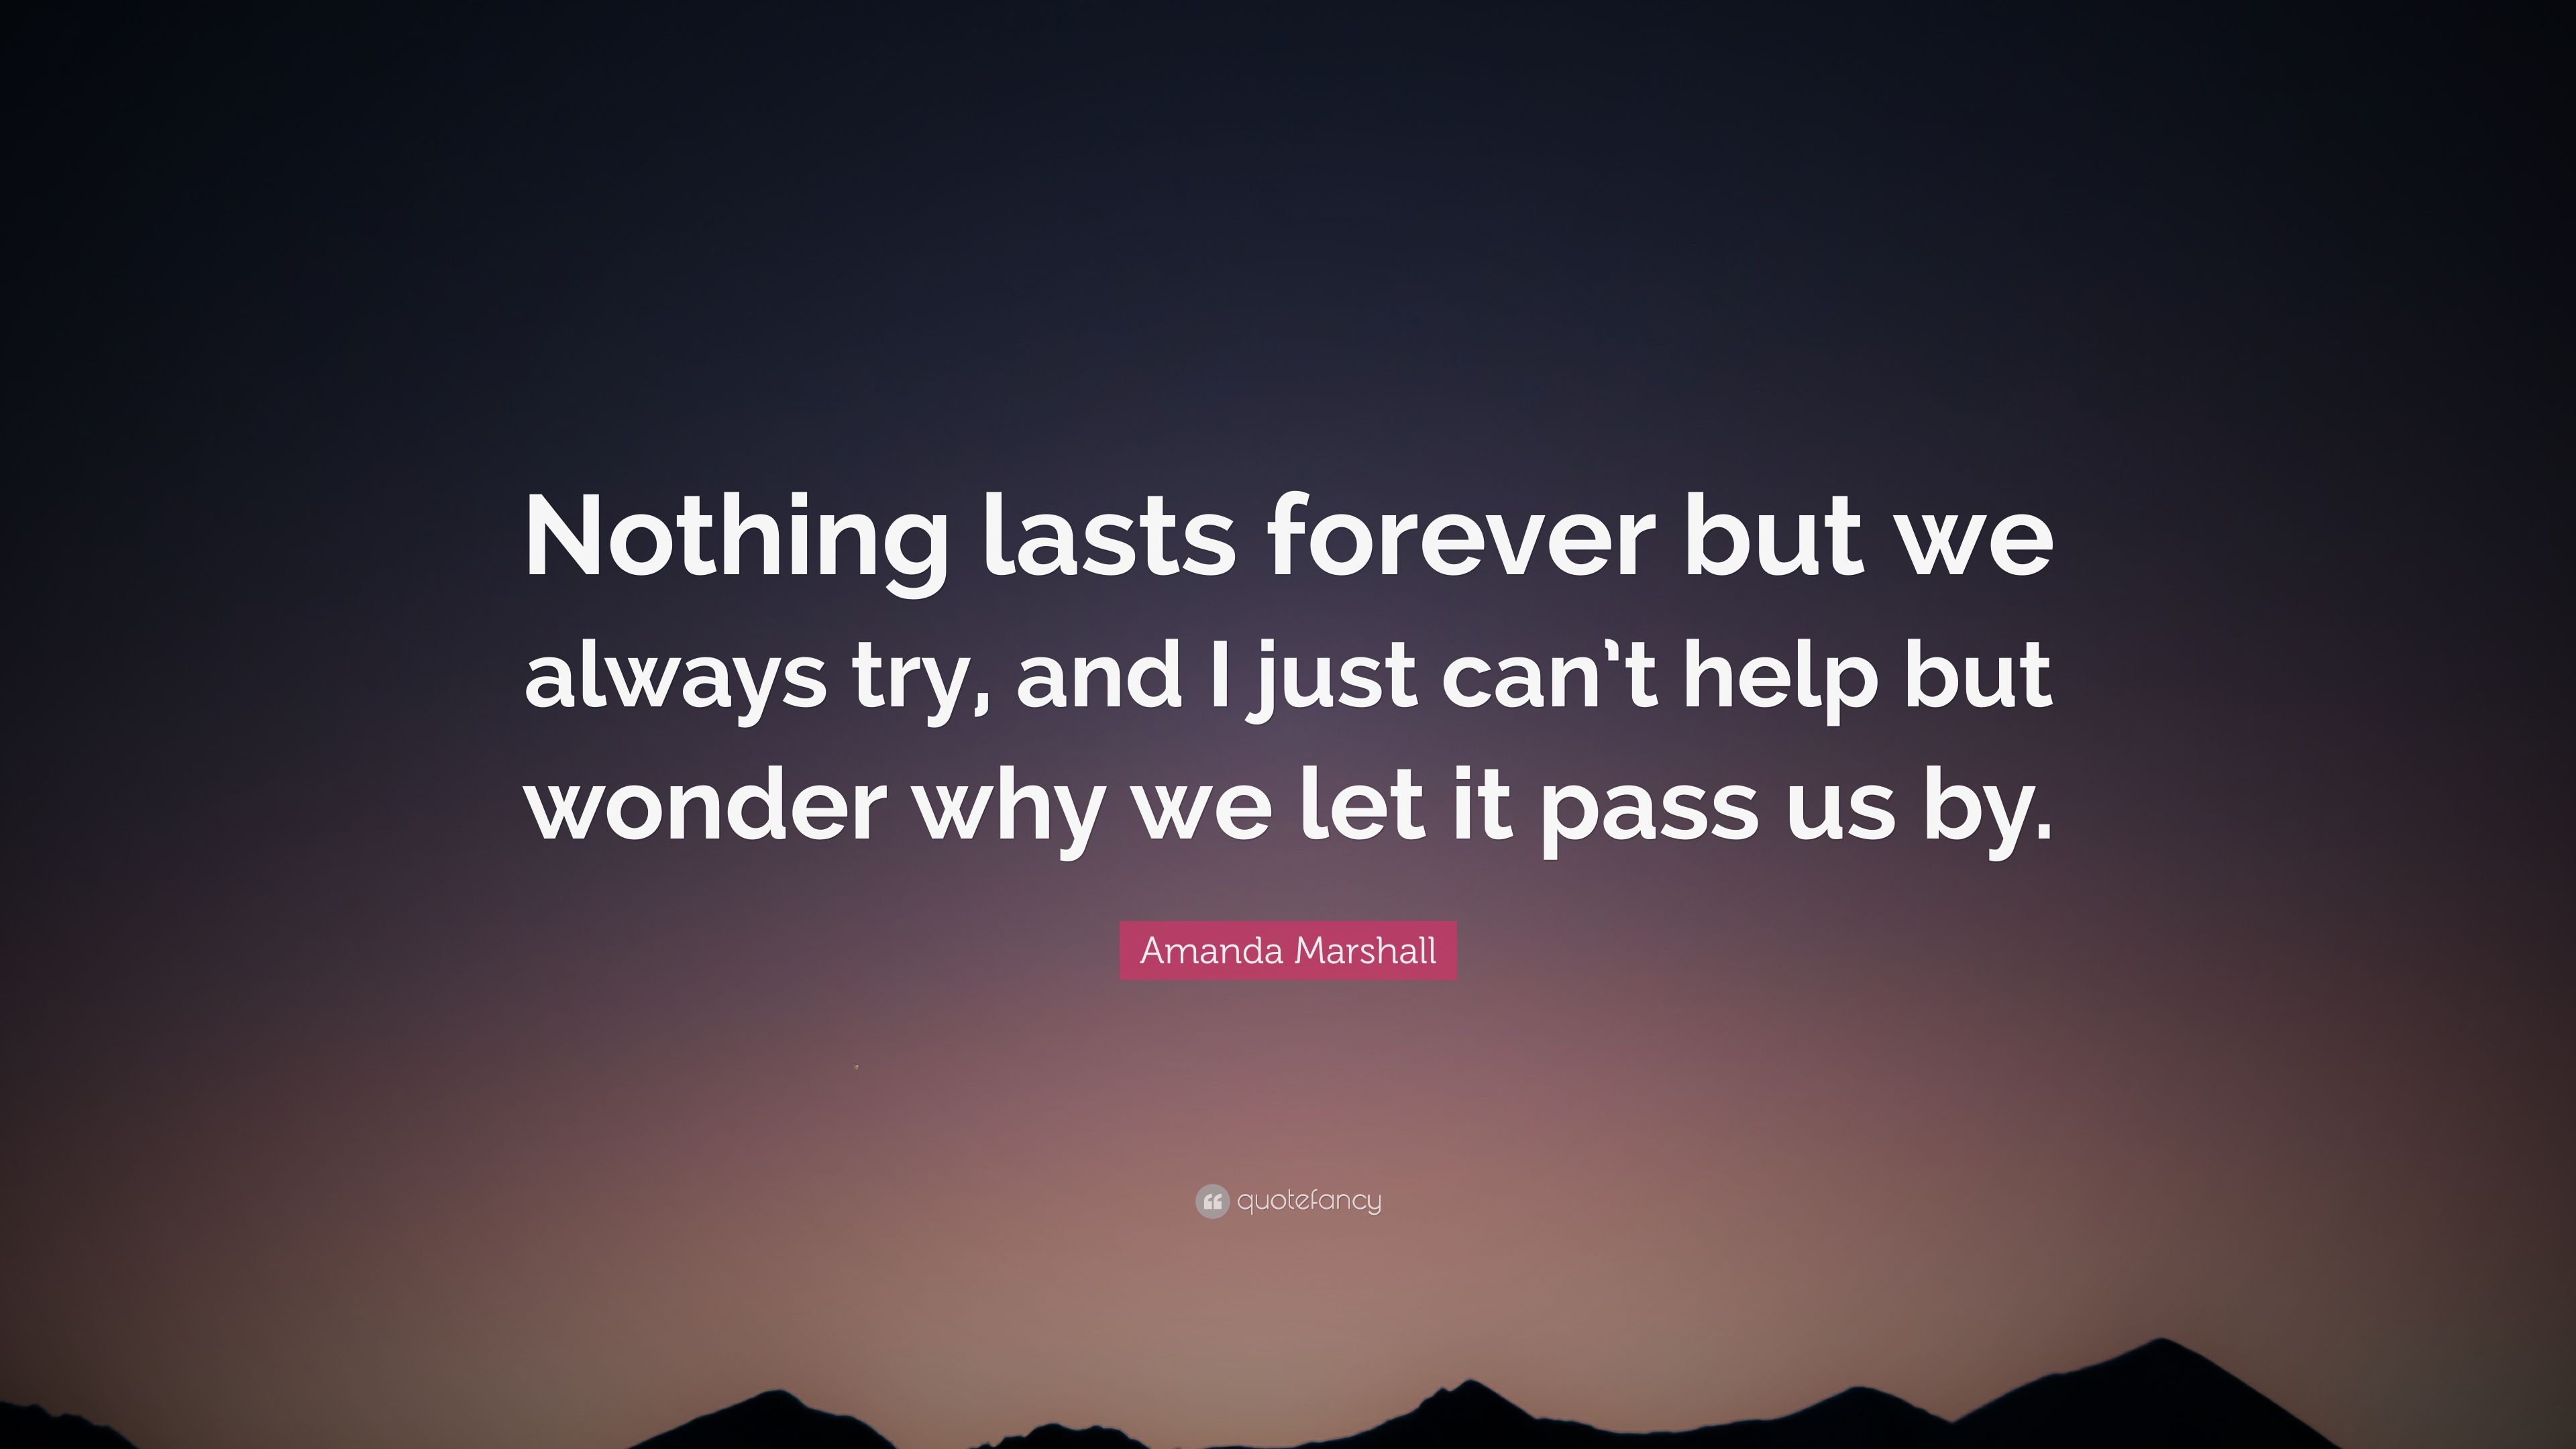 Amanda Marshall Quote: “Nothing lasts forever but we always try, and I just can't help but wonder why we let it pass us by.” (7 wallpaper)